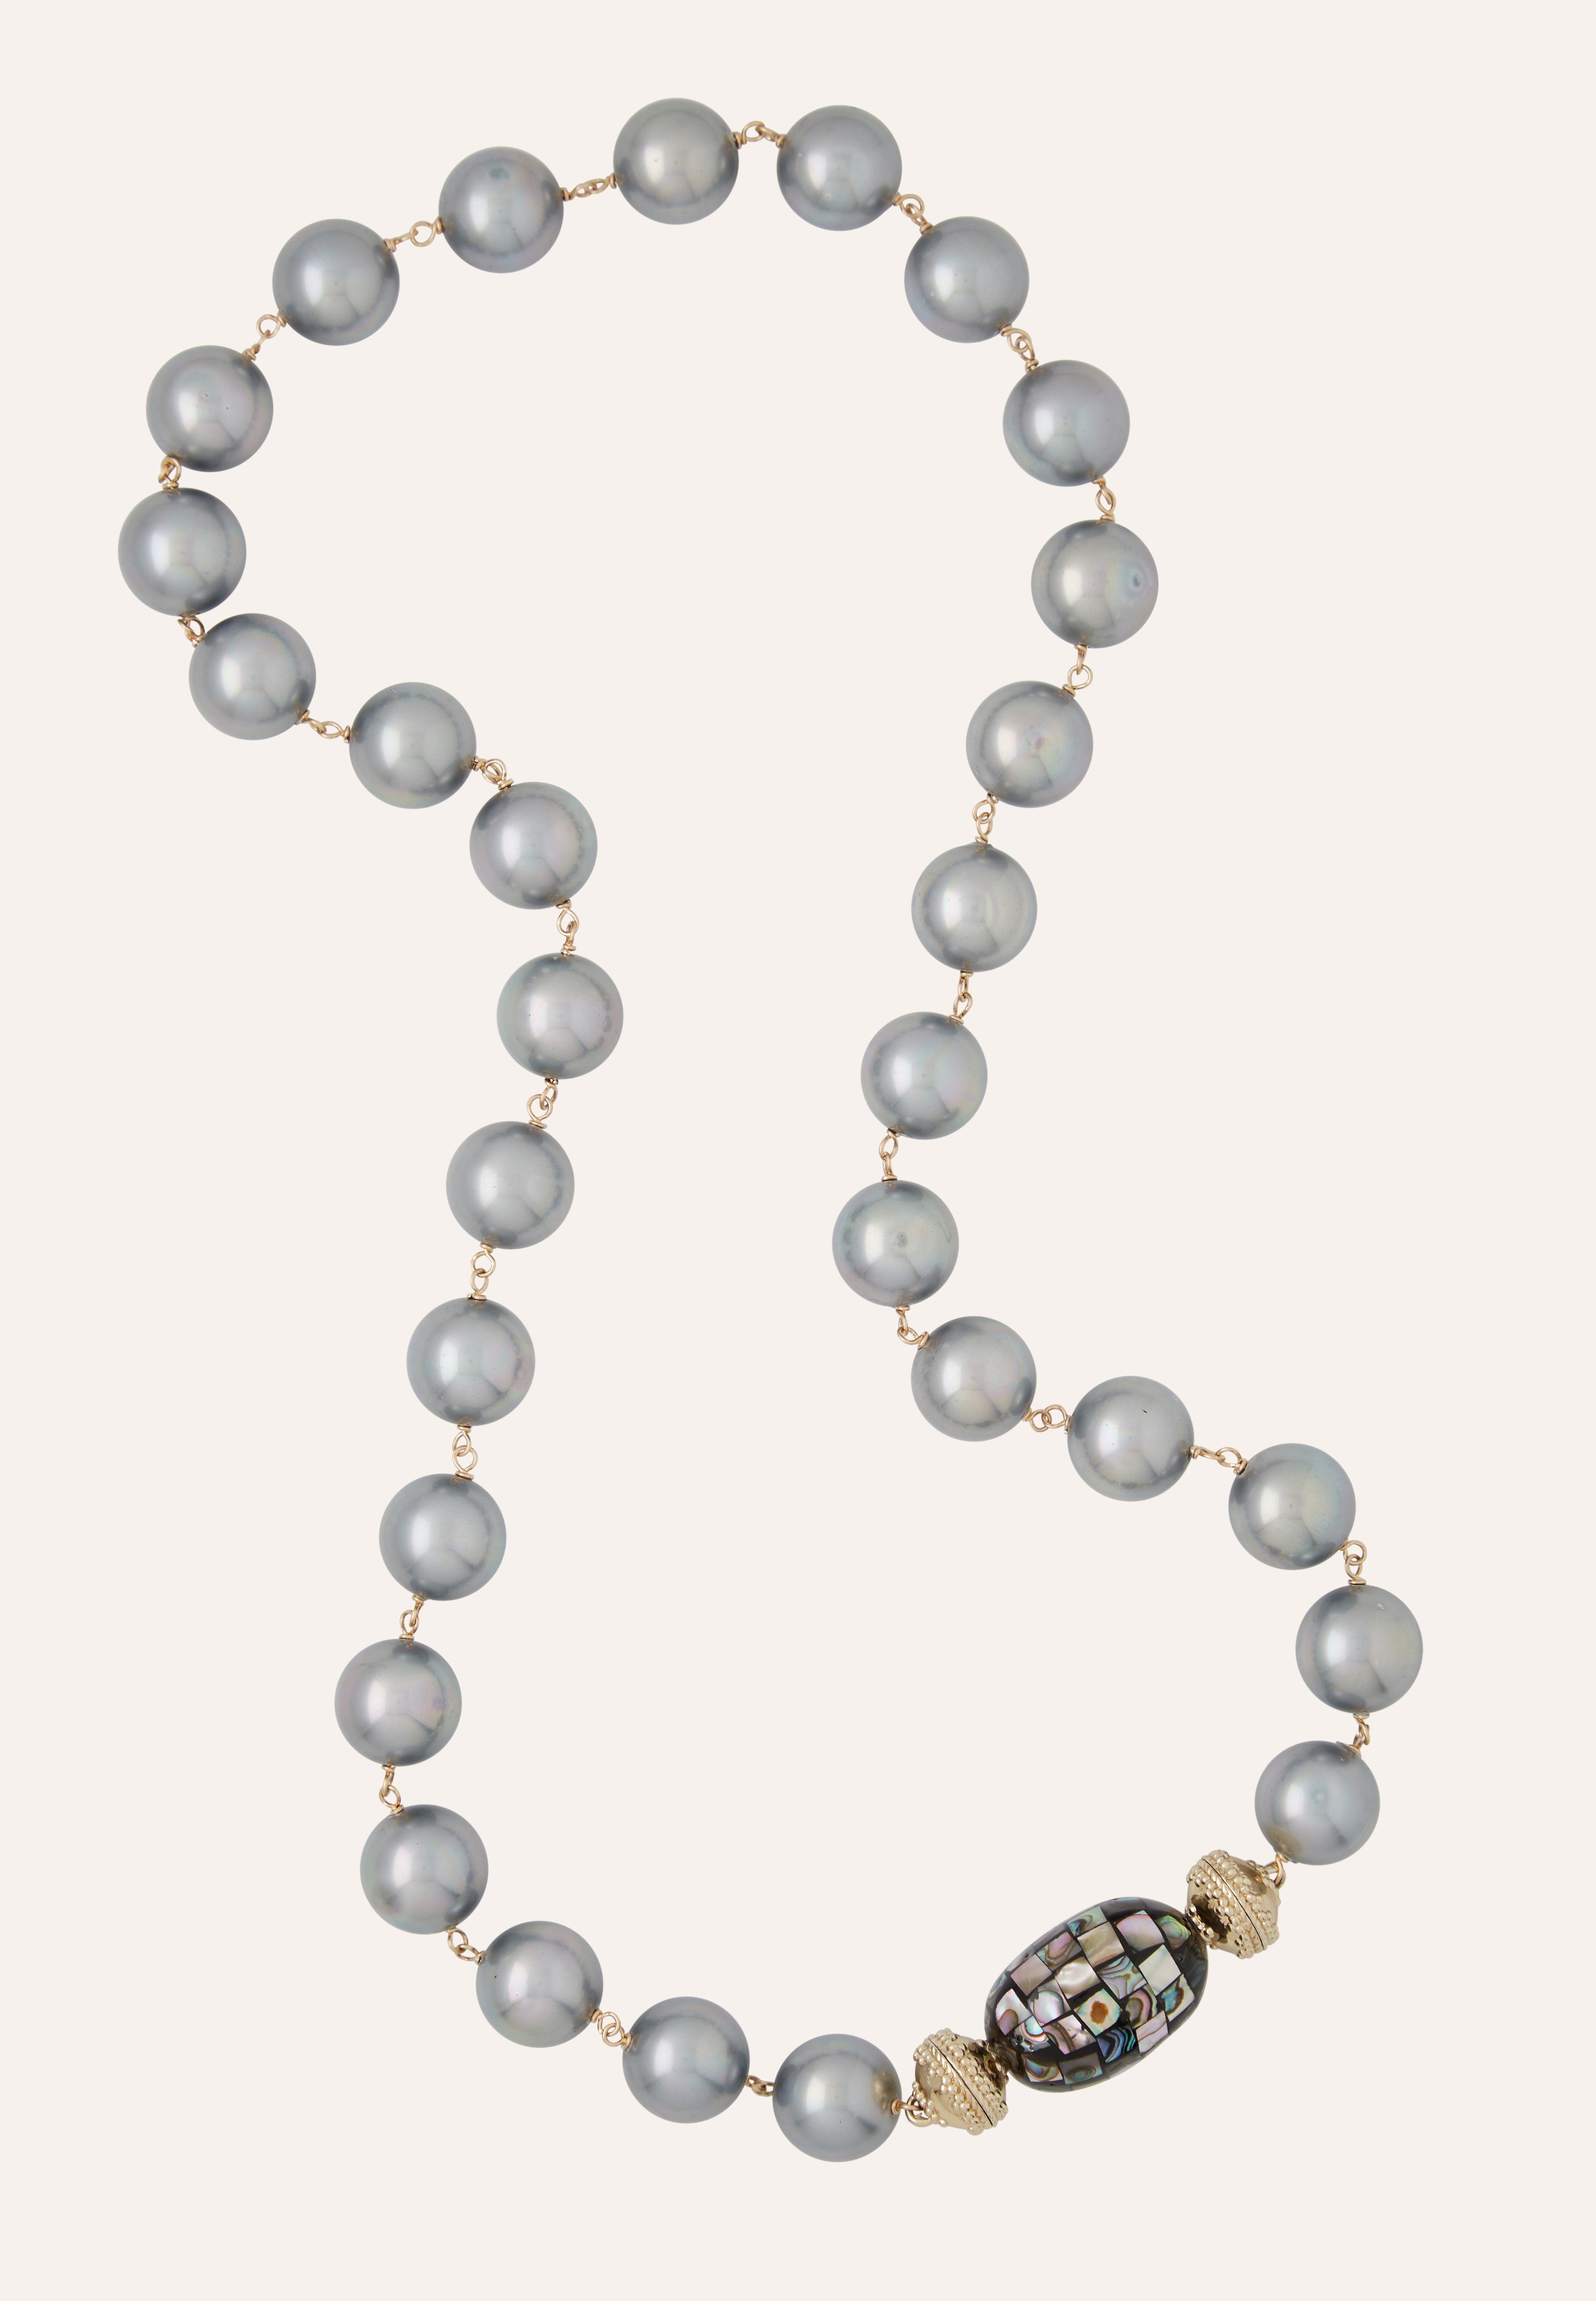 Caspian Victoire Gray Shell Pearl 16mm Necklace